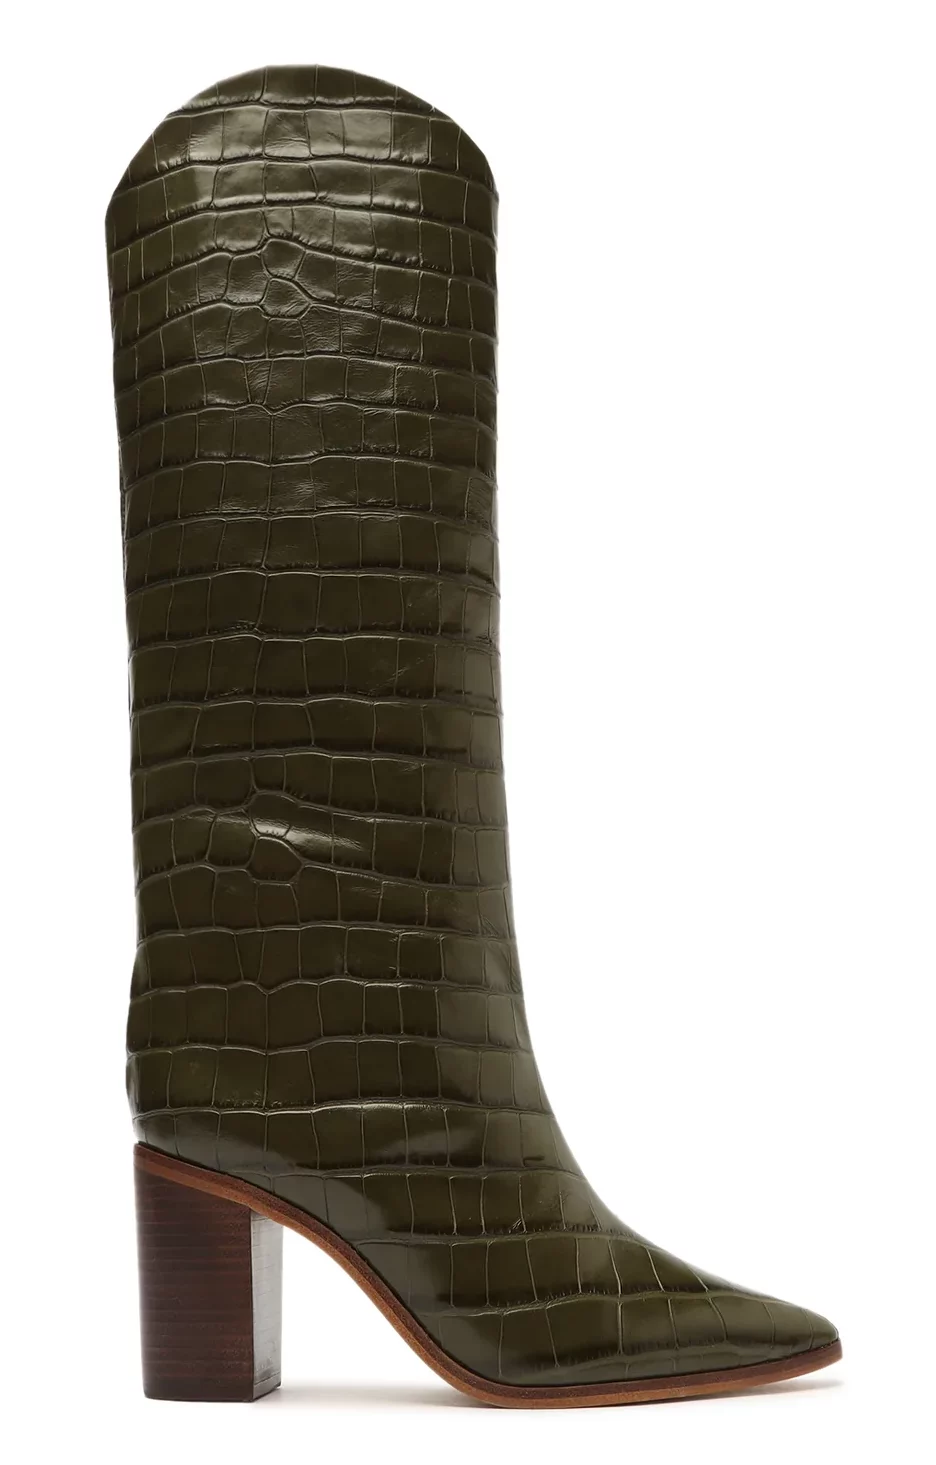 Nashville Personal Stylists Pick 3: Must Have Shoes For Winter olive green block crocodile embossed leather boot must have tall boot for winter personal stylists share must have boot for winter nashville stylists share favorite shoes for winter how to wear a tall boot this winter